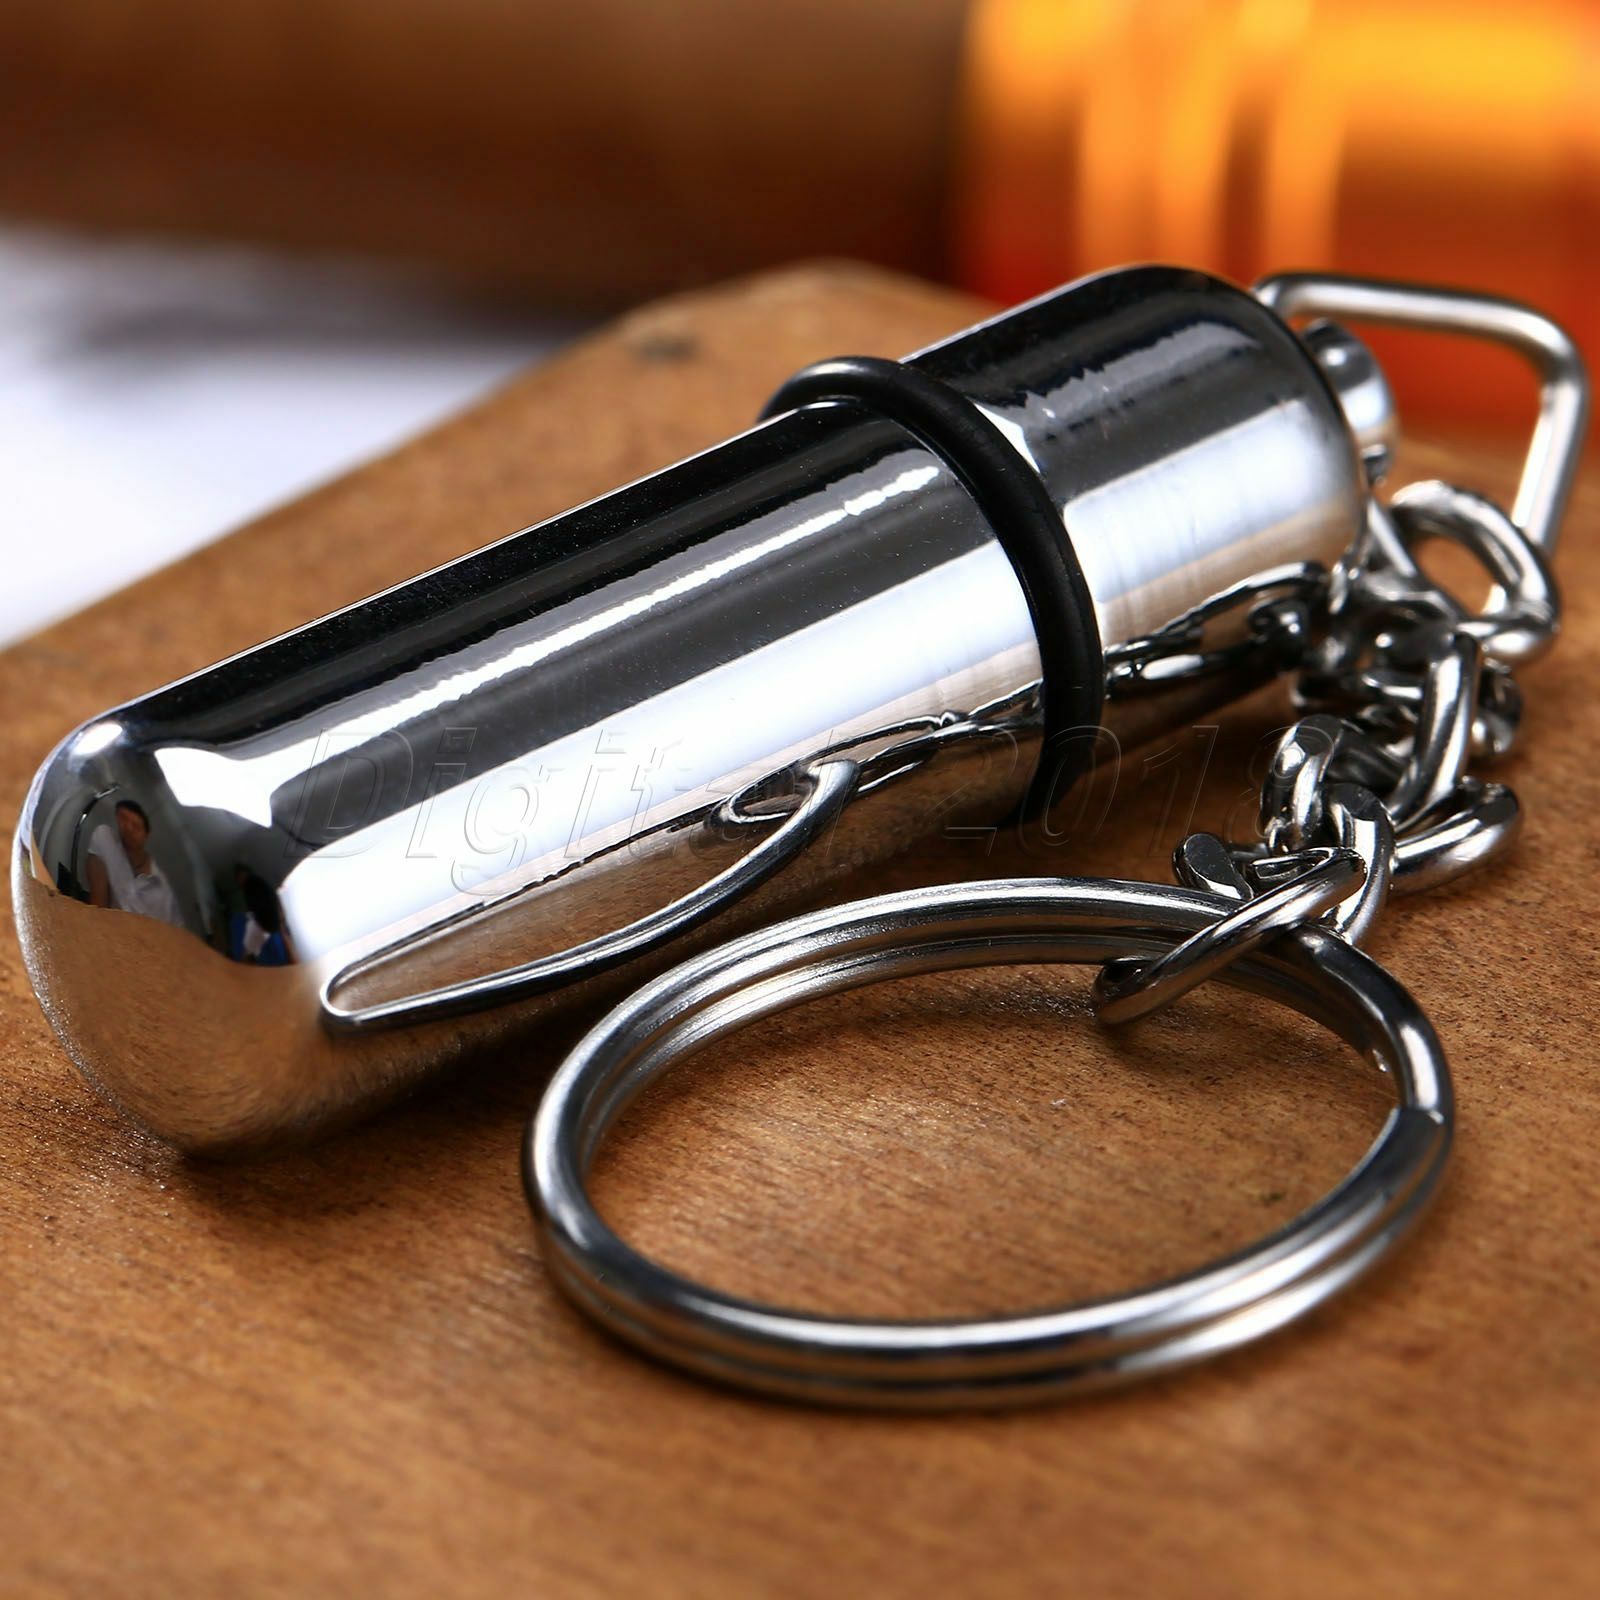 Stainless Steel Cigar Punch Cutter with Key Chain Ring Silver Color Bullet Shape